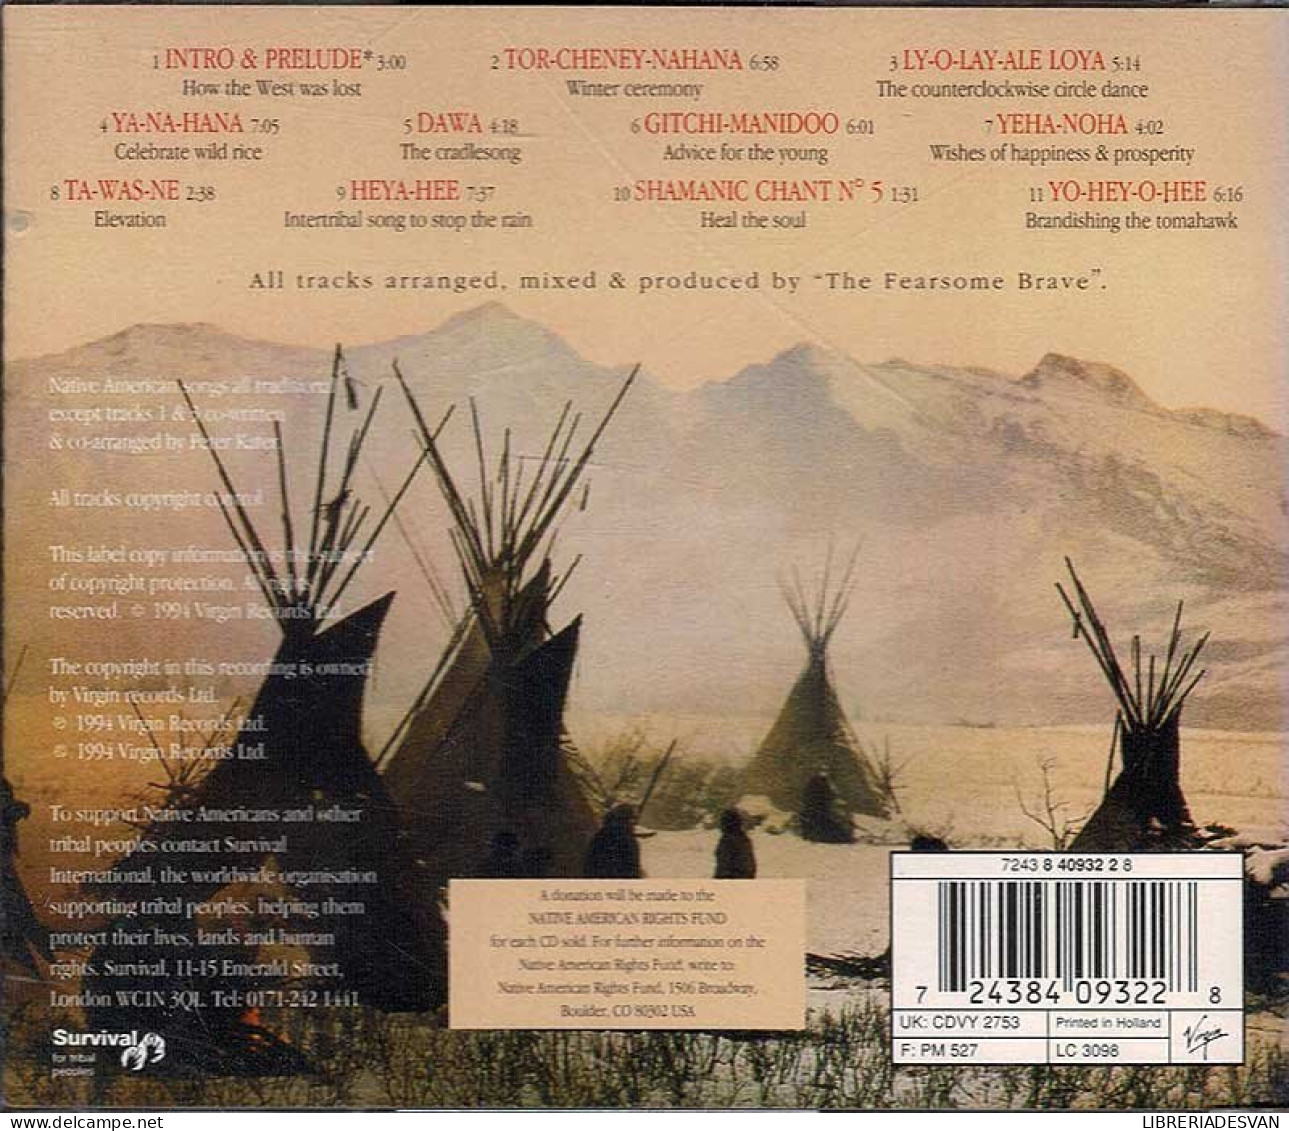 Sacred Spirit - Chants And Dances Of The Native Americans. CD - Nueva Era (New Age)